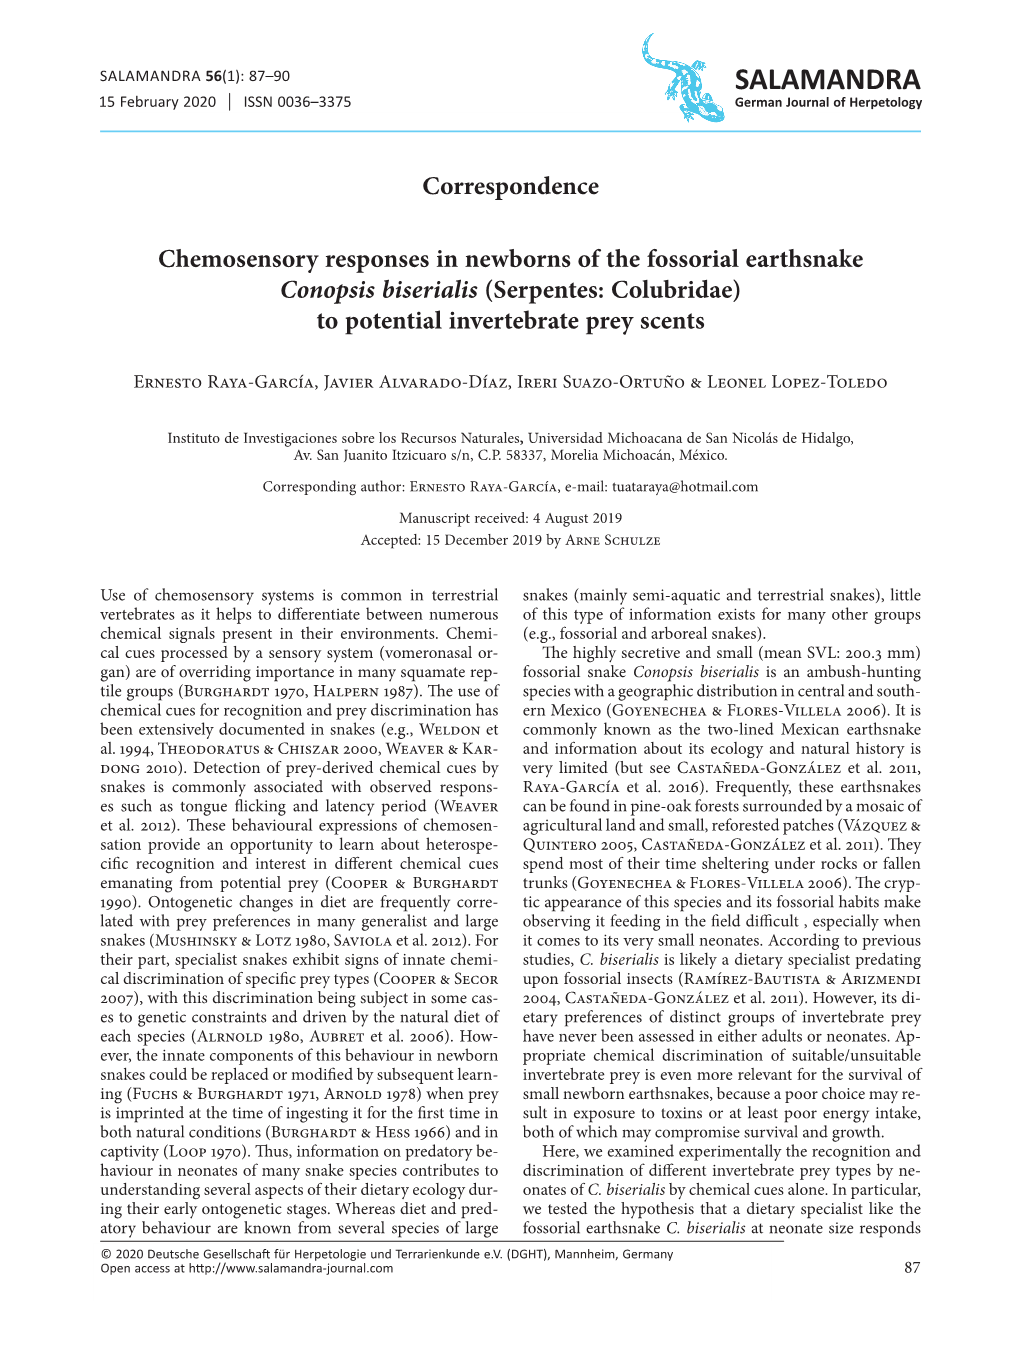 Chemosensory Responses in Newborns of the Fossorial Earthsnake Conopsis Biserialis (Serpentes: Colubridae) to Potential Invertebrate Prey Scents